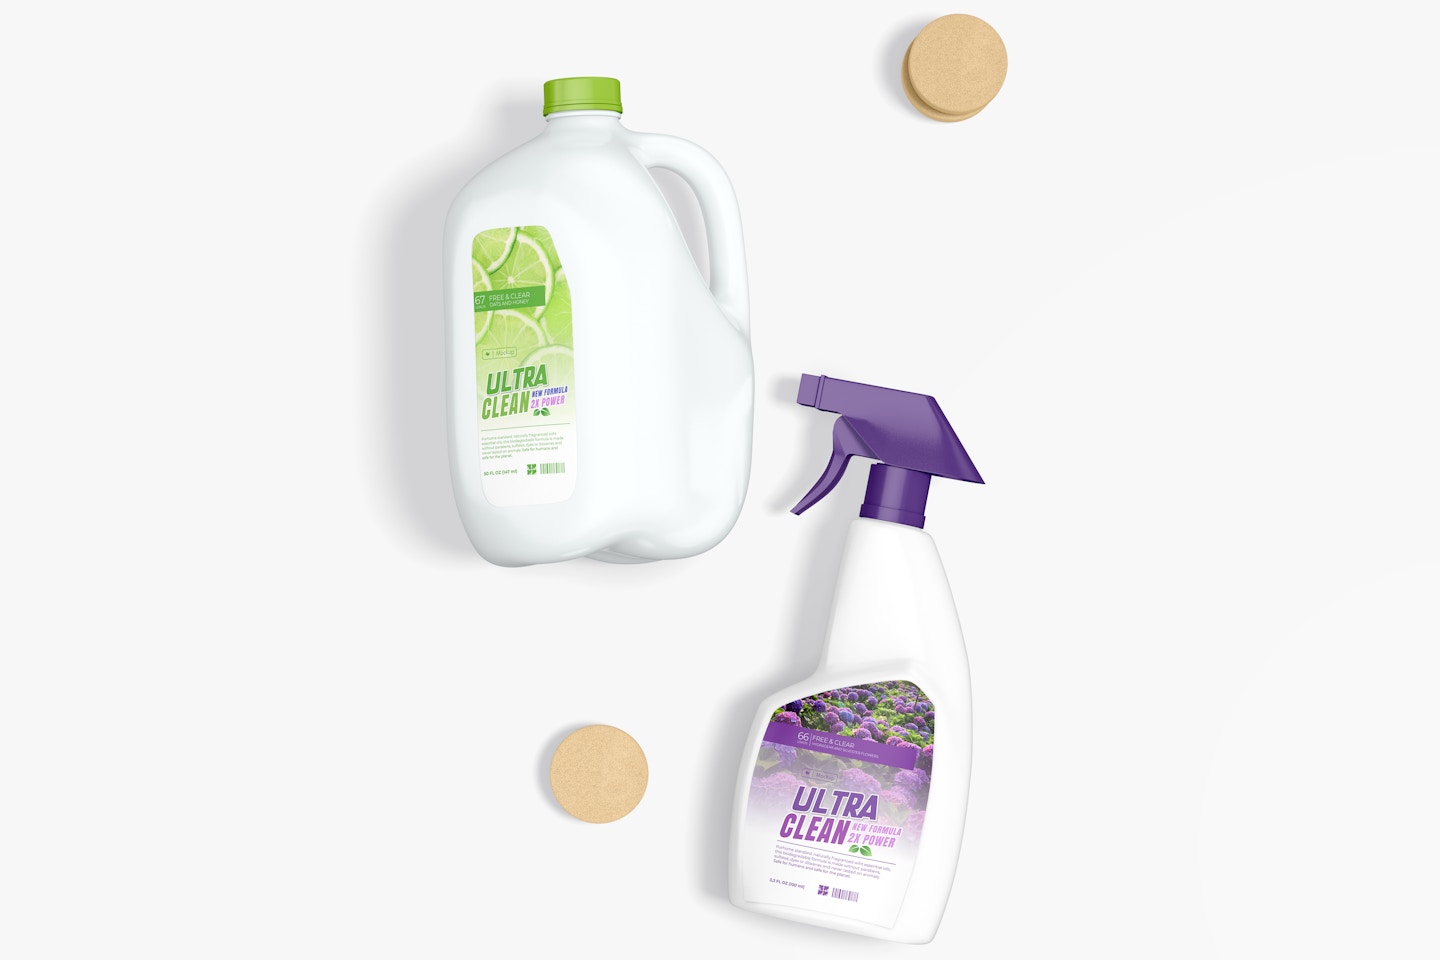 Cleaning Products Scene Mockup, Top View